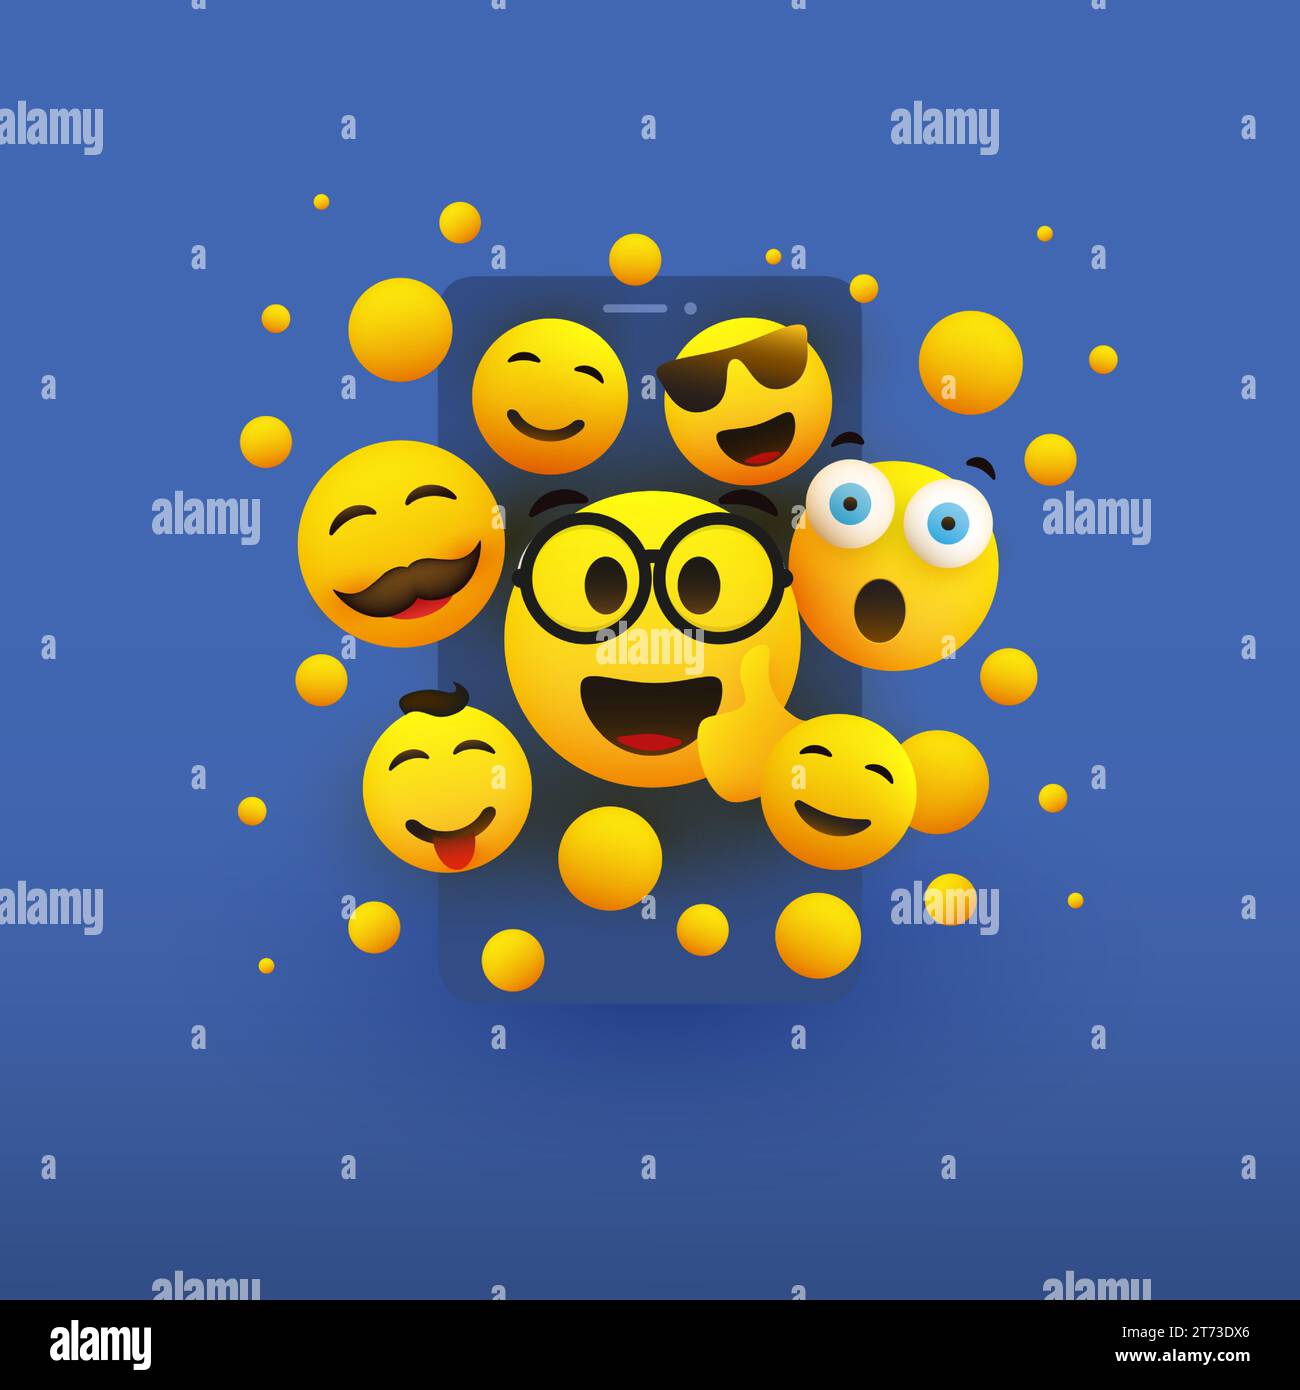 Many Faces, Various Emoticons - Lots of Laughing, Smiling, Surprised Face, Yellow Emoji Beyond a Smart Phone Screen - Instant Messaging, Social Media Stock Vector